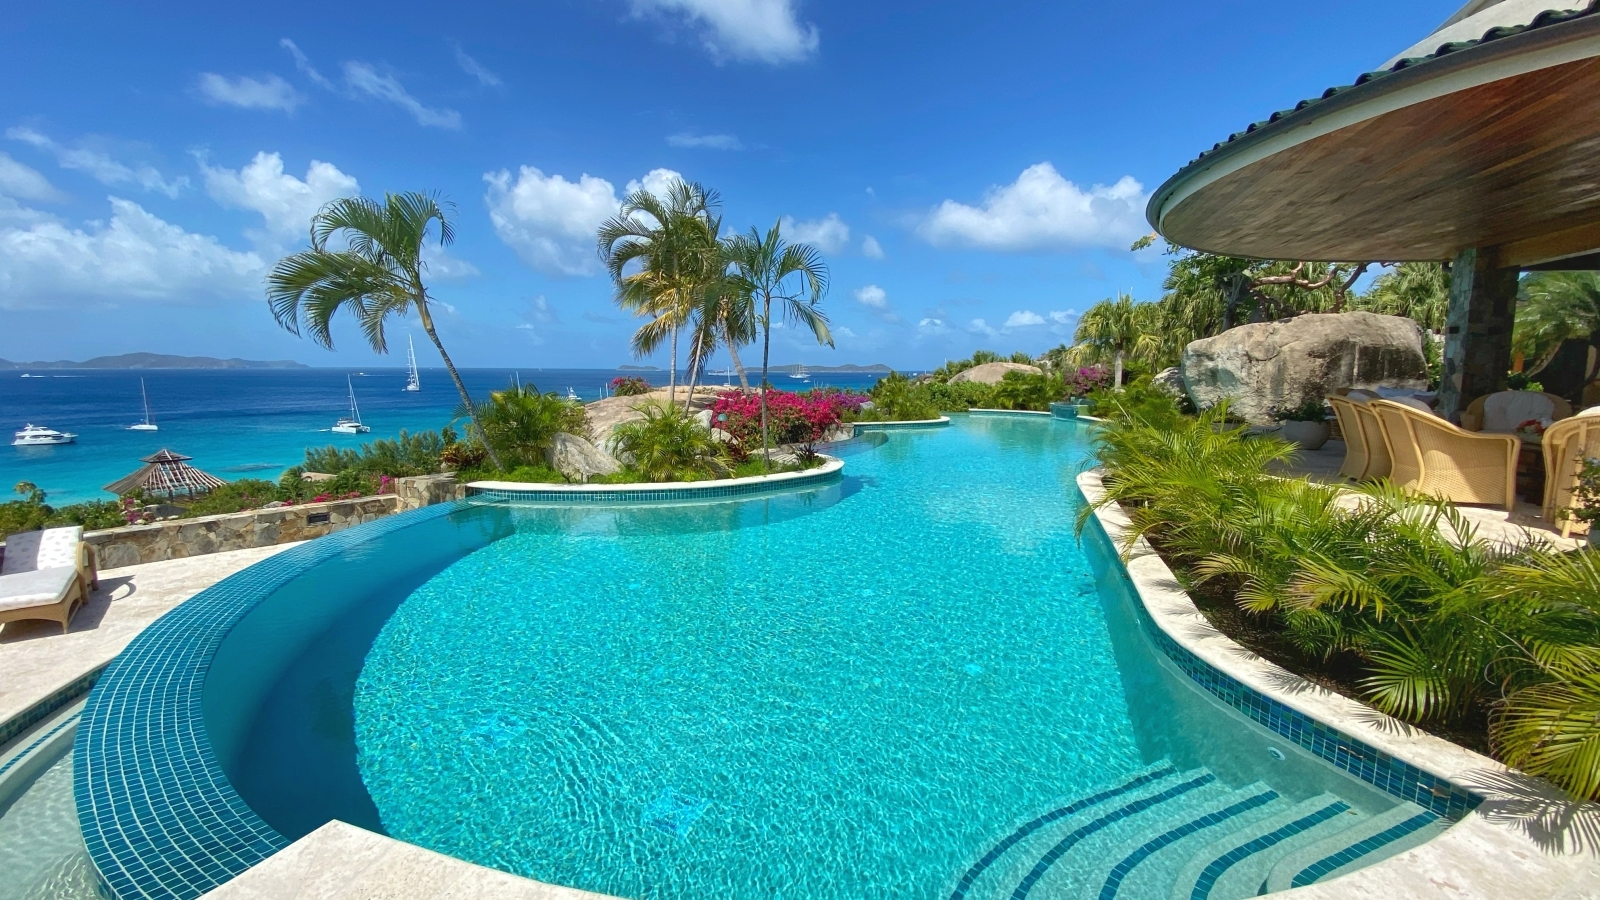 Large pool with sea view next to patio area at Valley Trunk on the British Virgin Islands, Caribbean